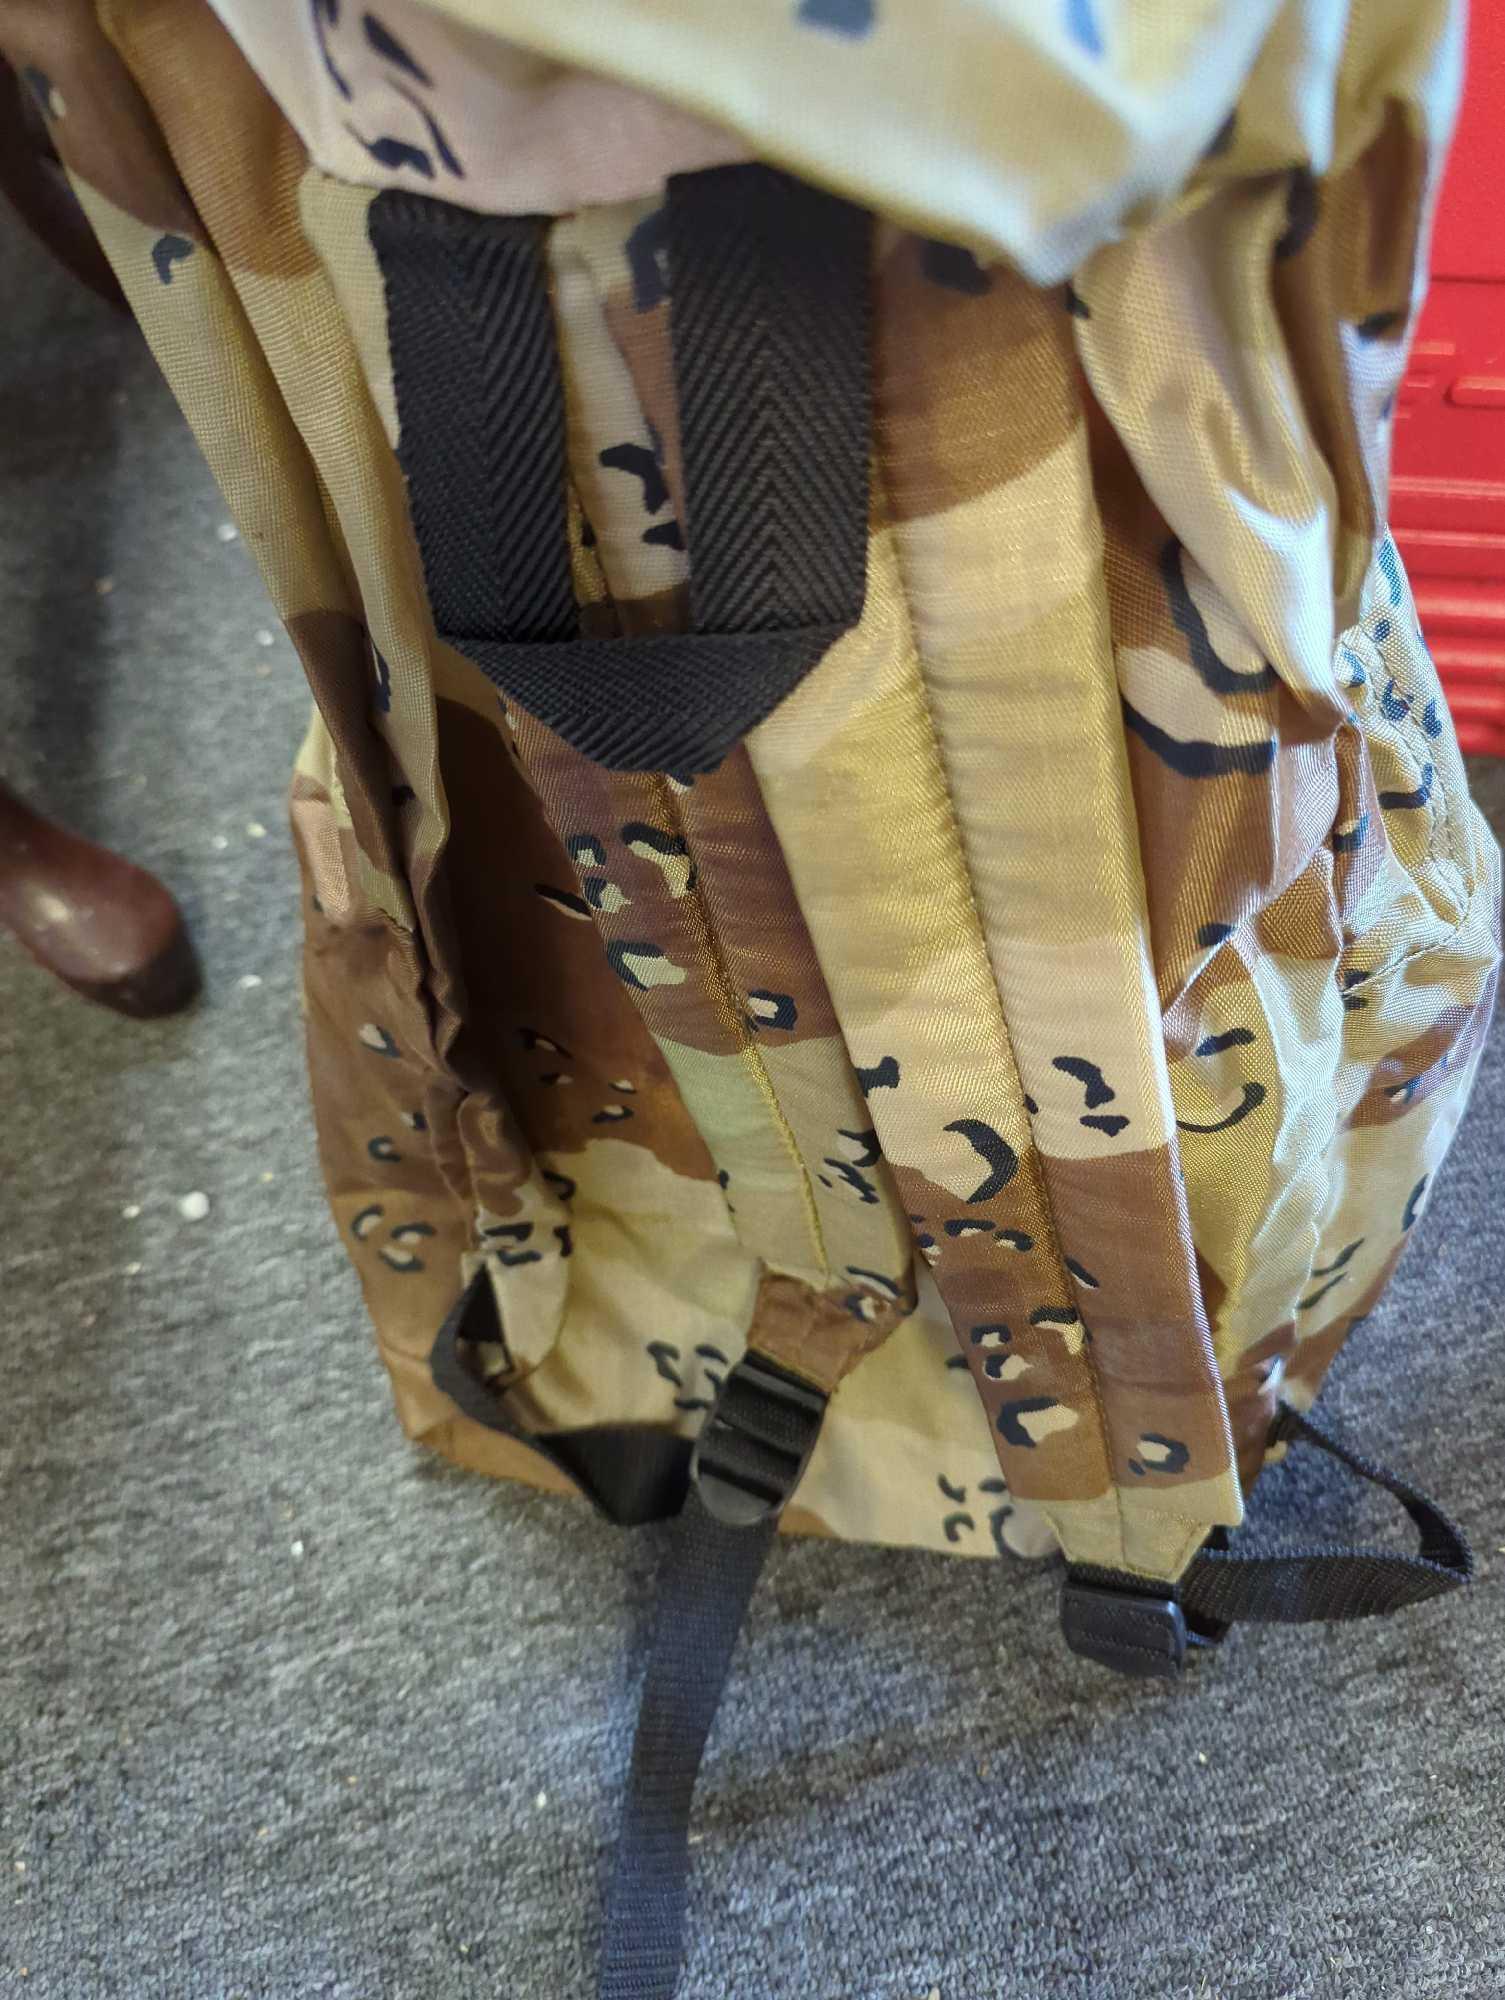 American Camper Desert Camouflage Back Pack, New, What you see in photos is what you will receive